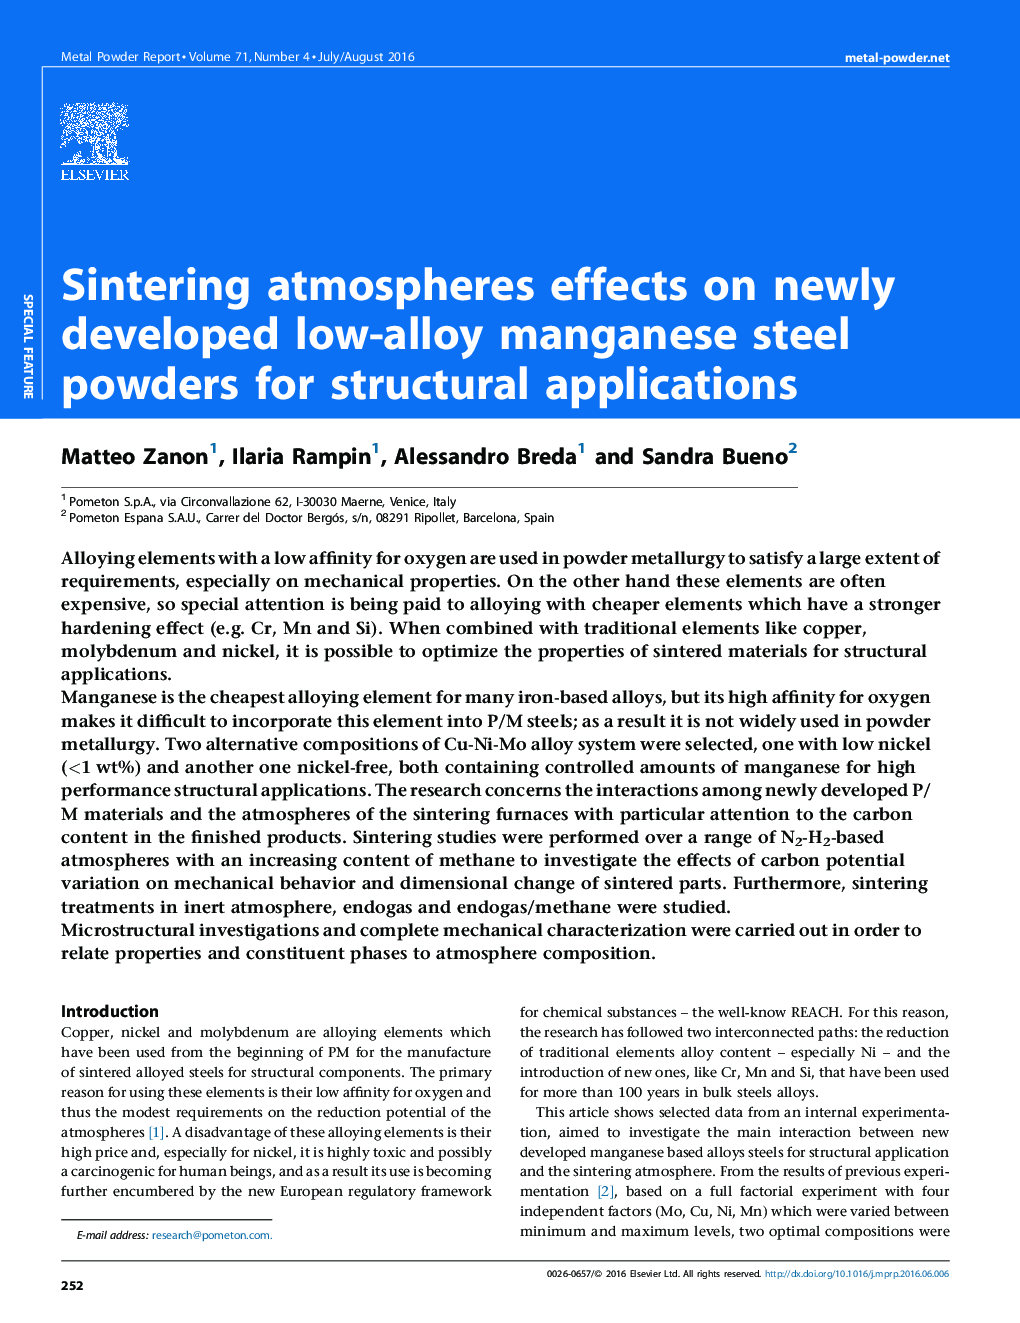 Sintering atmospheres effects on newly developed low-alloy manganese steel powders for structural applications